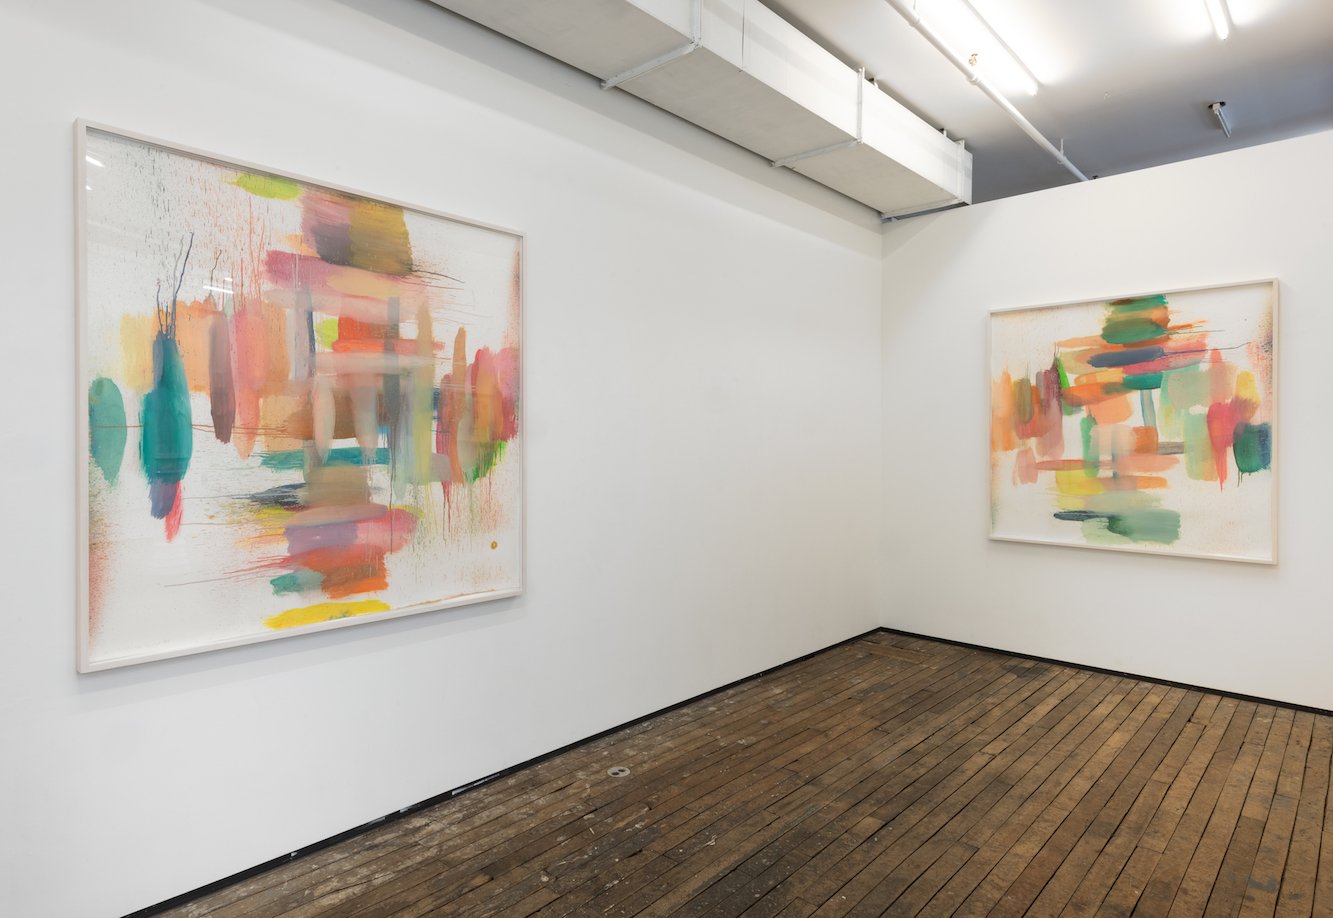  Installation view of Alix Le Méléder,  Paintings 1998-2011  at Zürcher Gallery Left to right:  Untitled, July 1998 ;  Untitled, June 1998 ; oil on paper, 59 x 59 in 